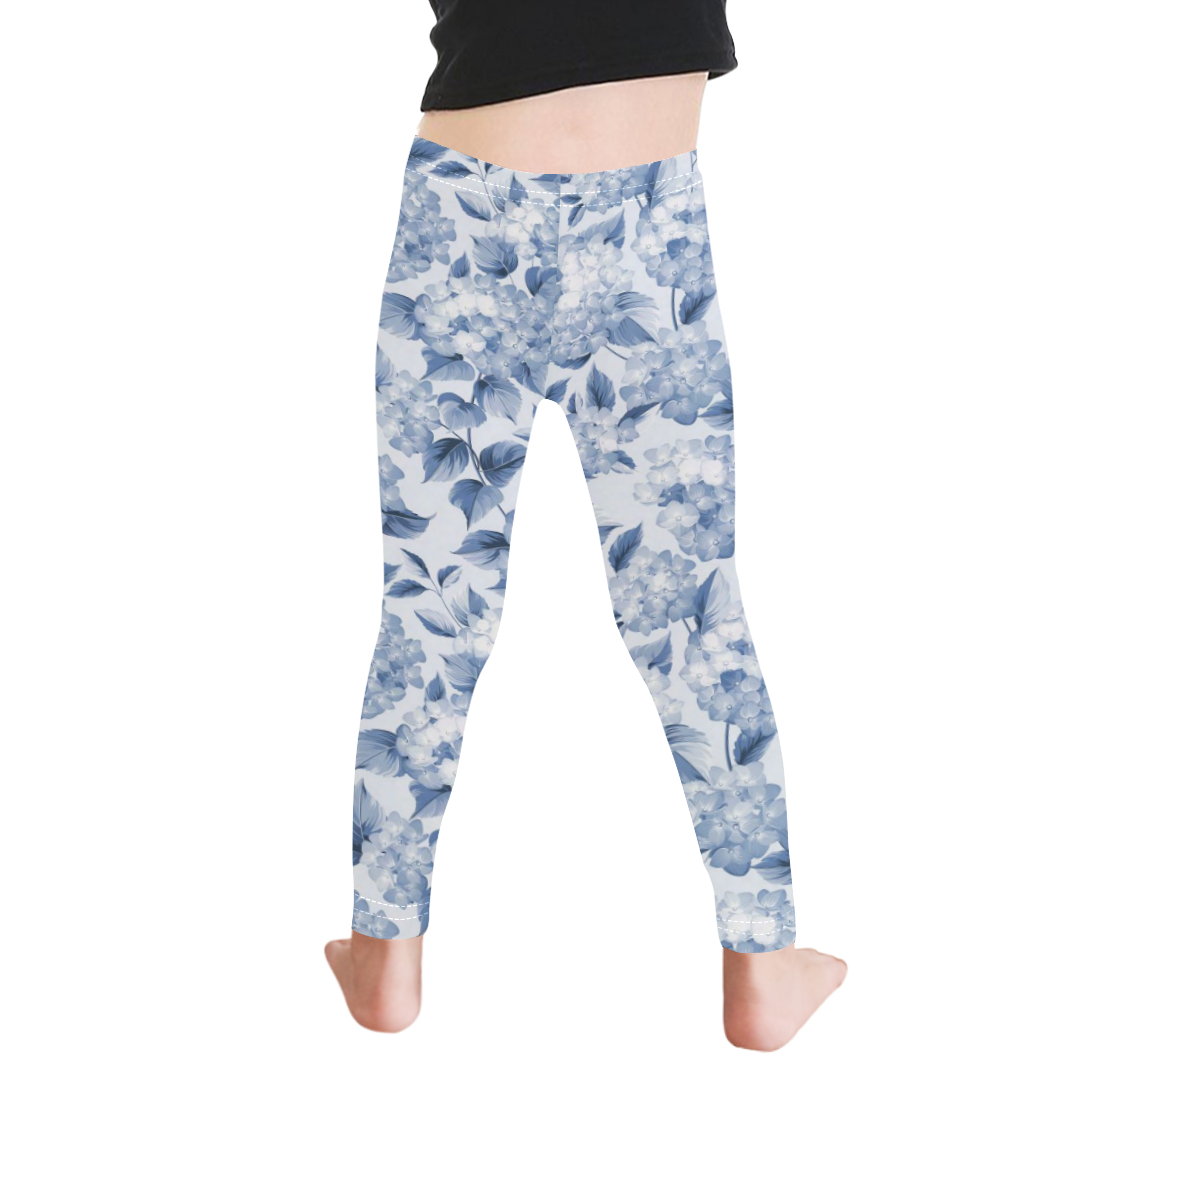 Blue and White Floral Pattern Kid's Ankle Length Leggings (Model L06)